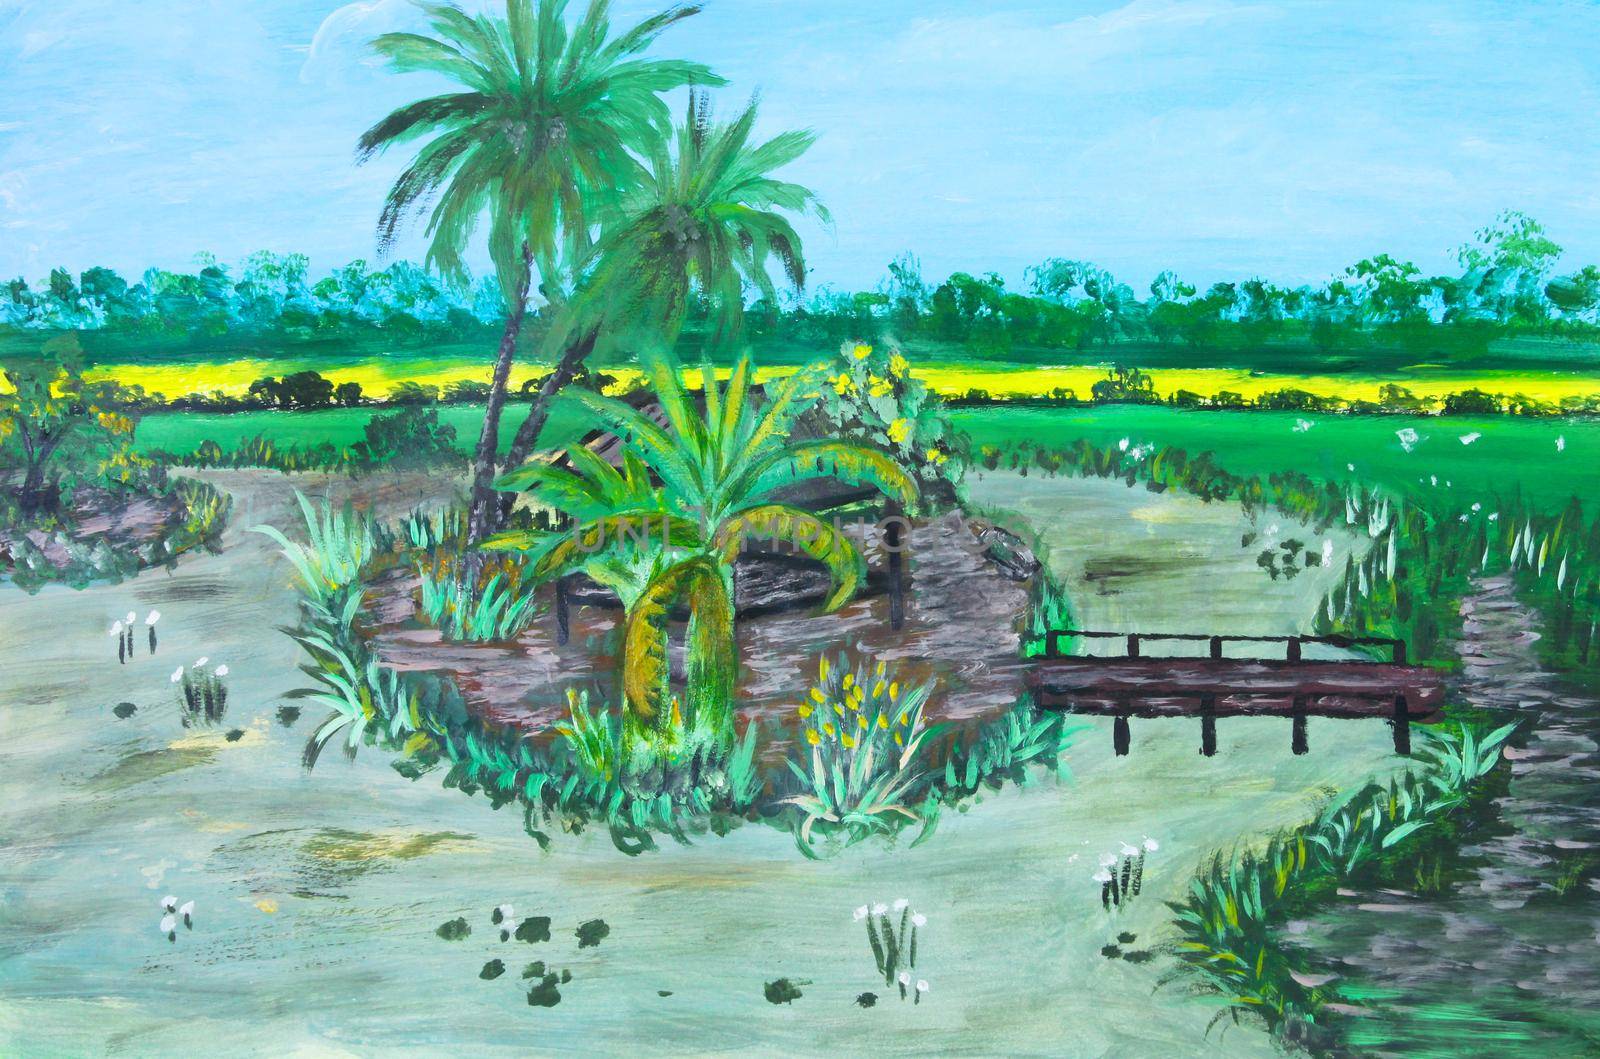 Oil painting on canvas of rural Thai countryside by jarenwicklund